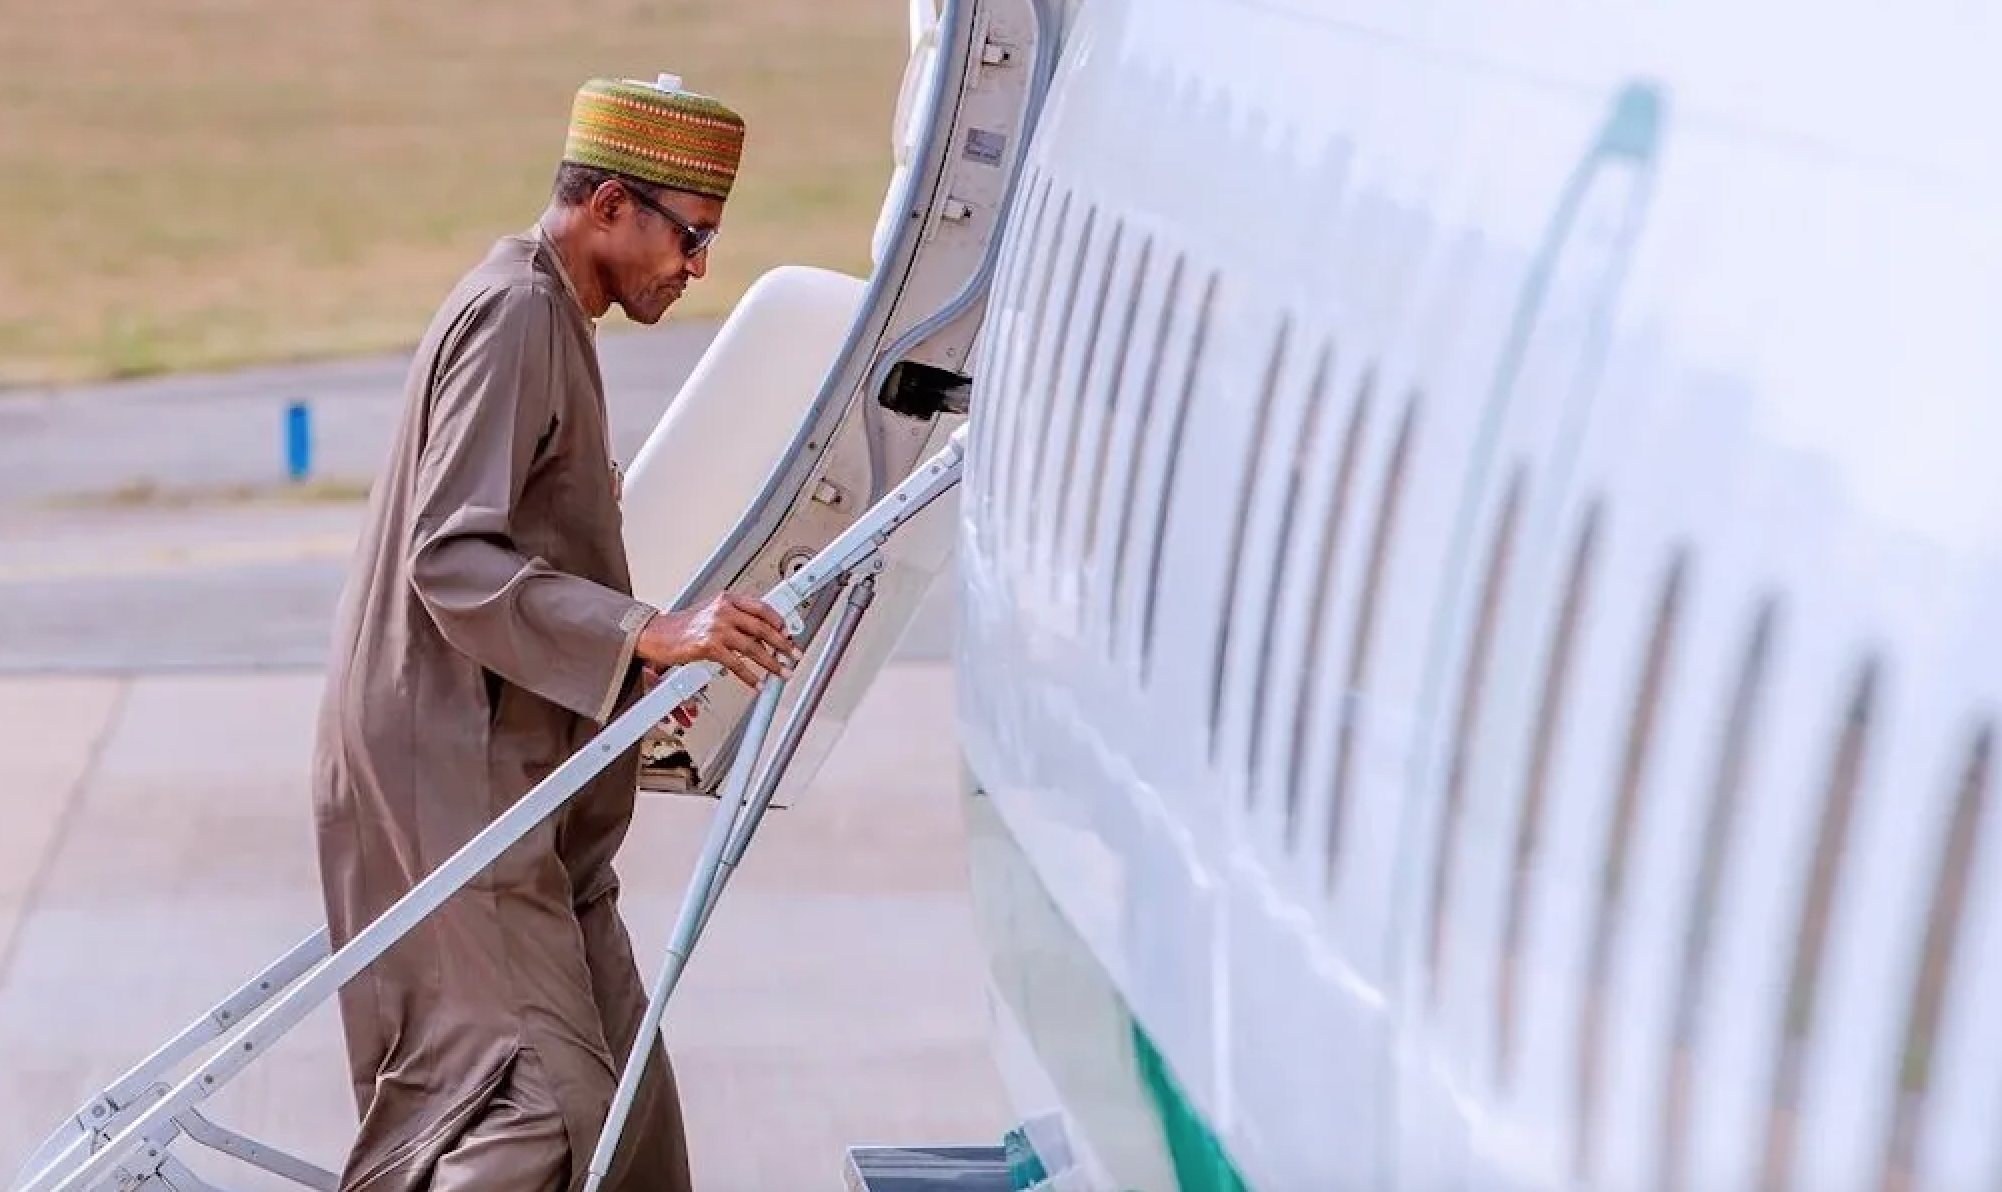 [GIST] Junketing Nigerian President, Buhari Travels To Liberia To ‘Discuss Security, Rule Of Law’